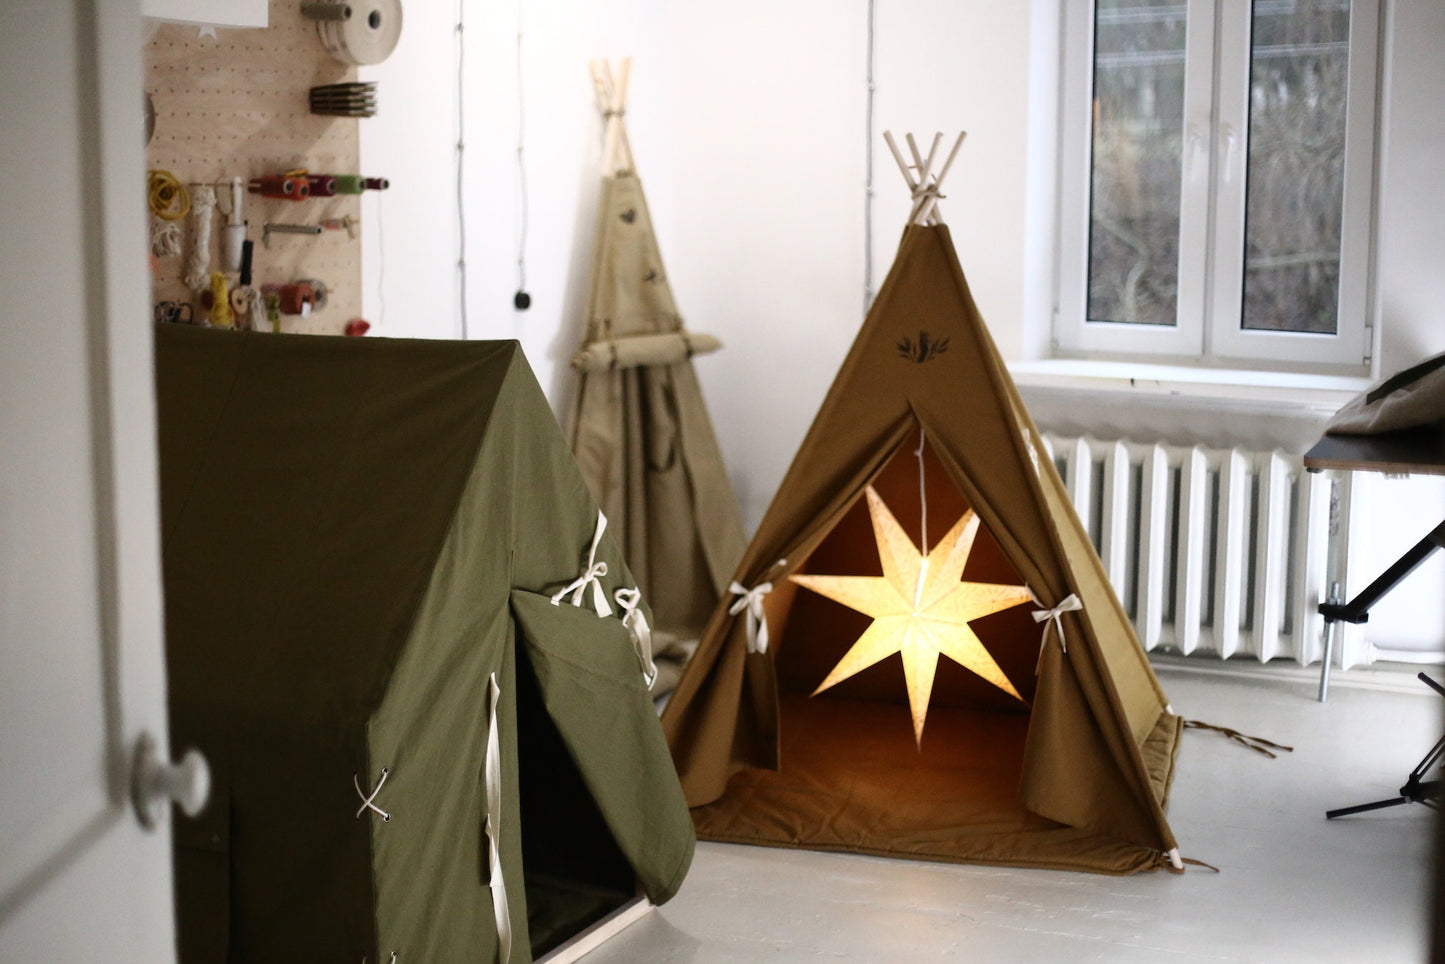 Portable Canopy Tent/Camping Teepee Tent/Indoor Tent Room/Nomadic Tipi/Indoor Tents For 10 Year Olds/Playroom Canopy Tent/Christmas presents